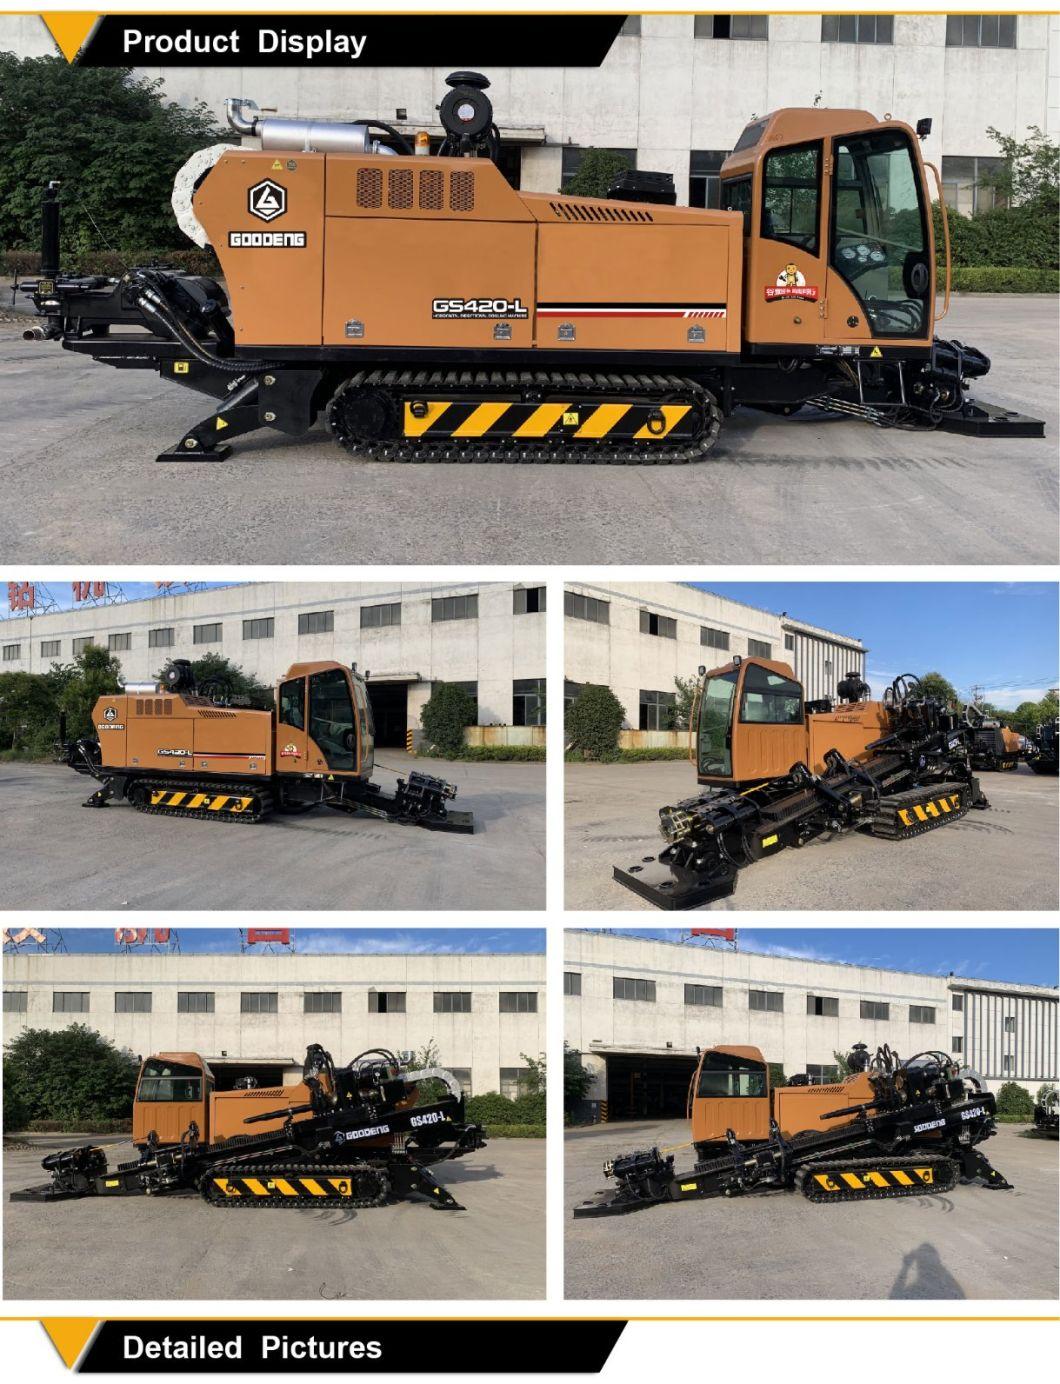 GS420-LS trenchless  machine long lifetime hdd machine